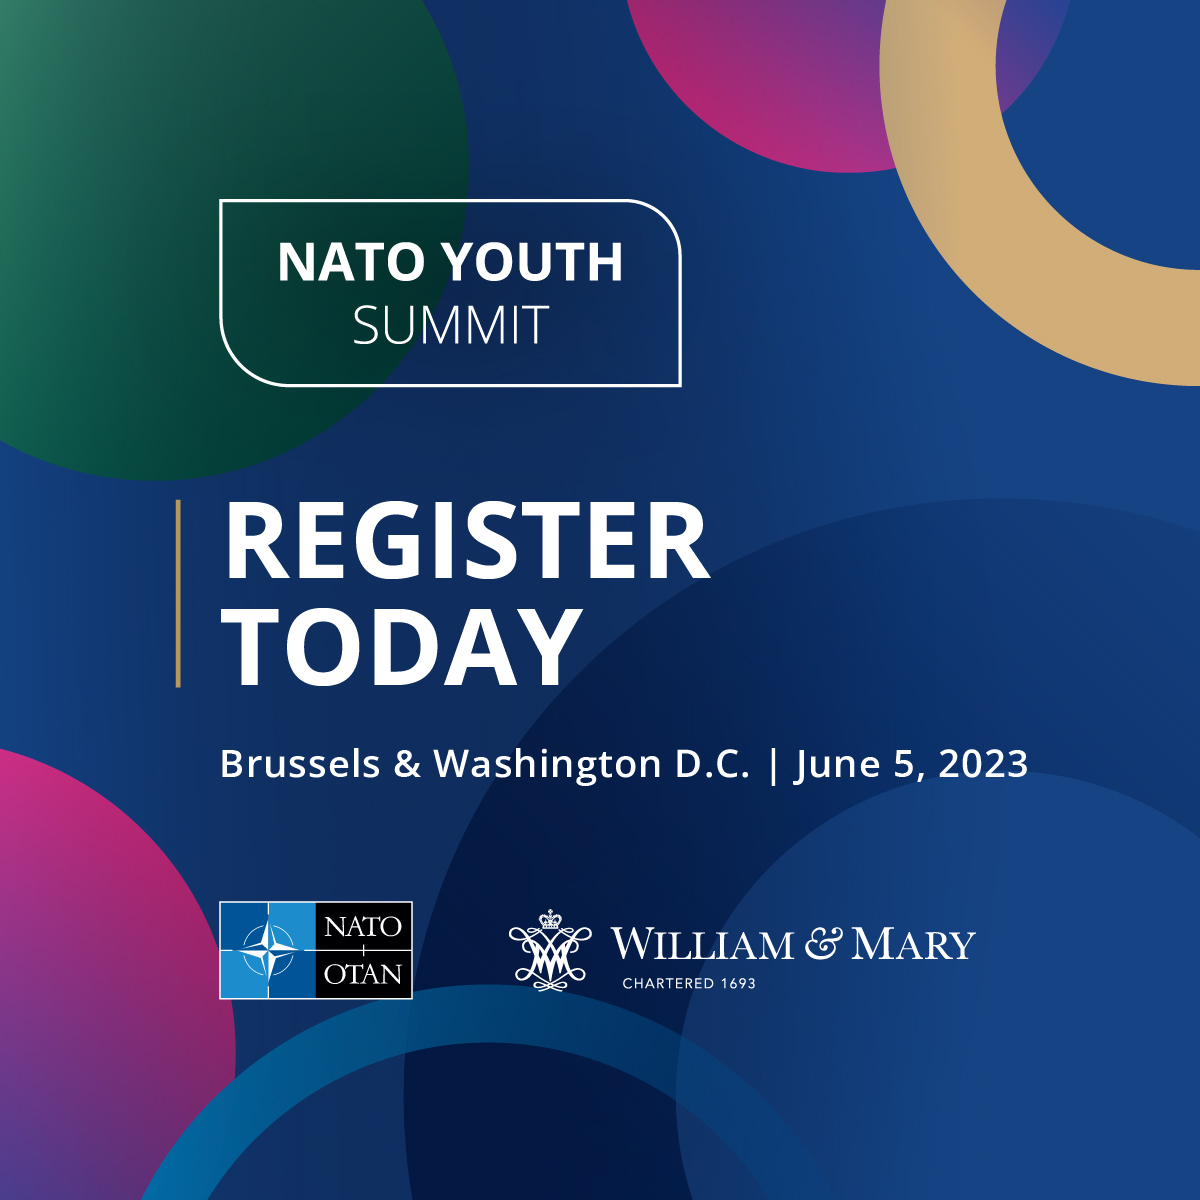 NATO Youth Summit - Register Today - Brussels &amp; Washington D.C. | June 5, 2023 - NATO/OTAN and William &amp; Mary